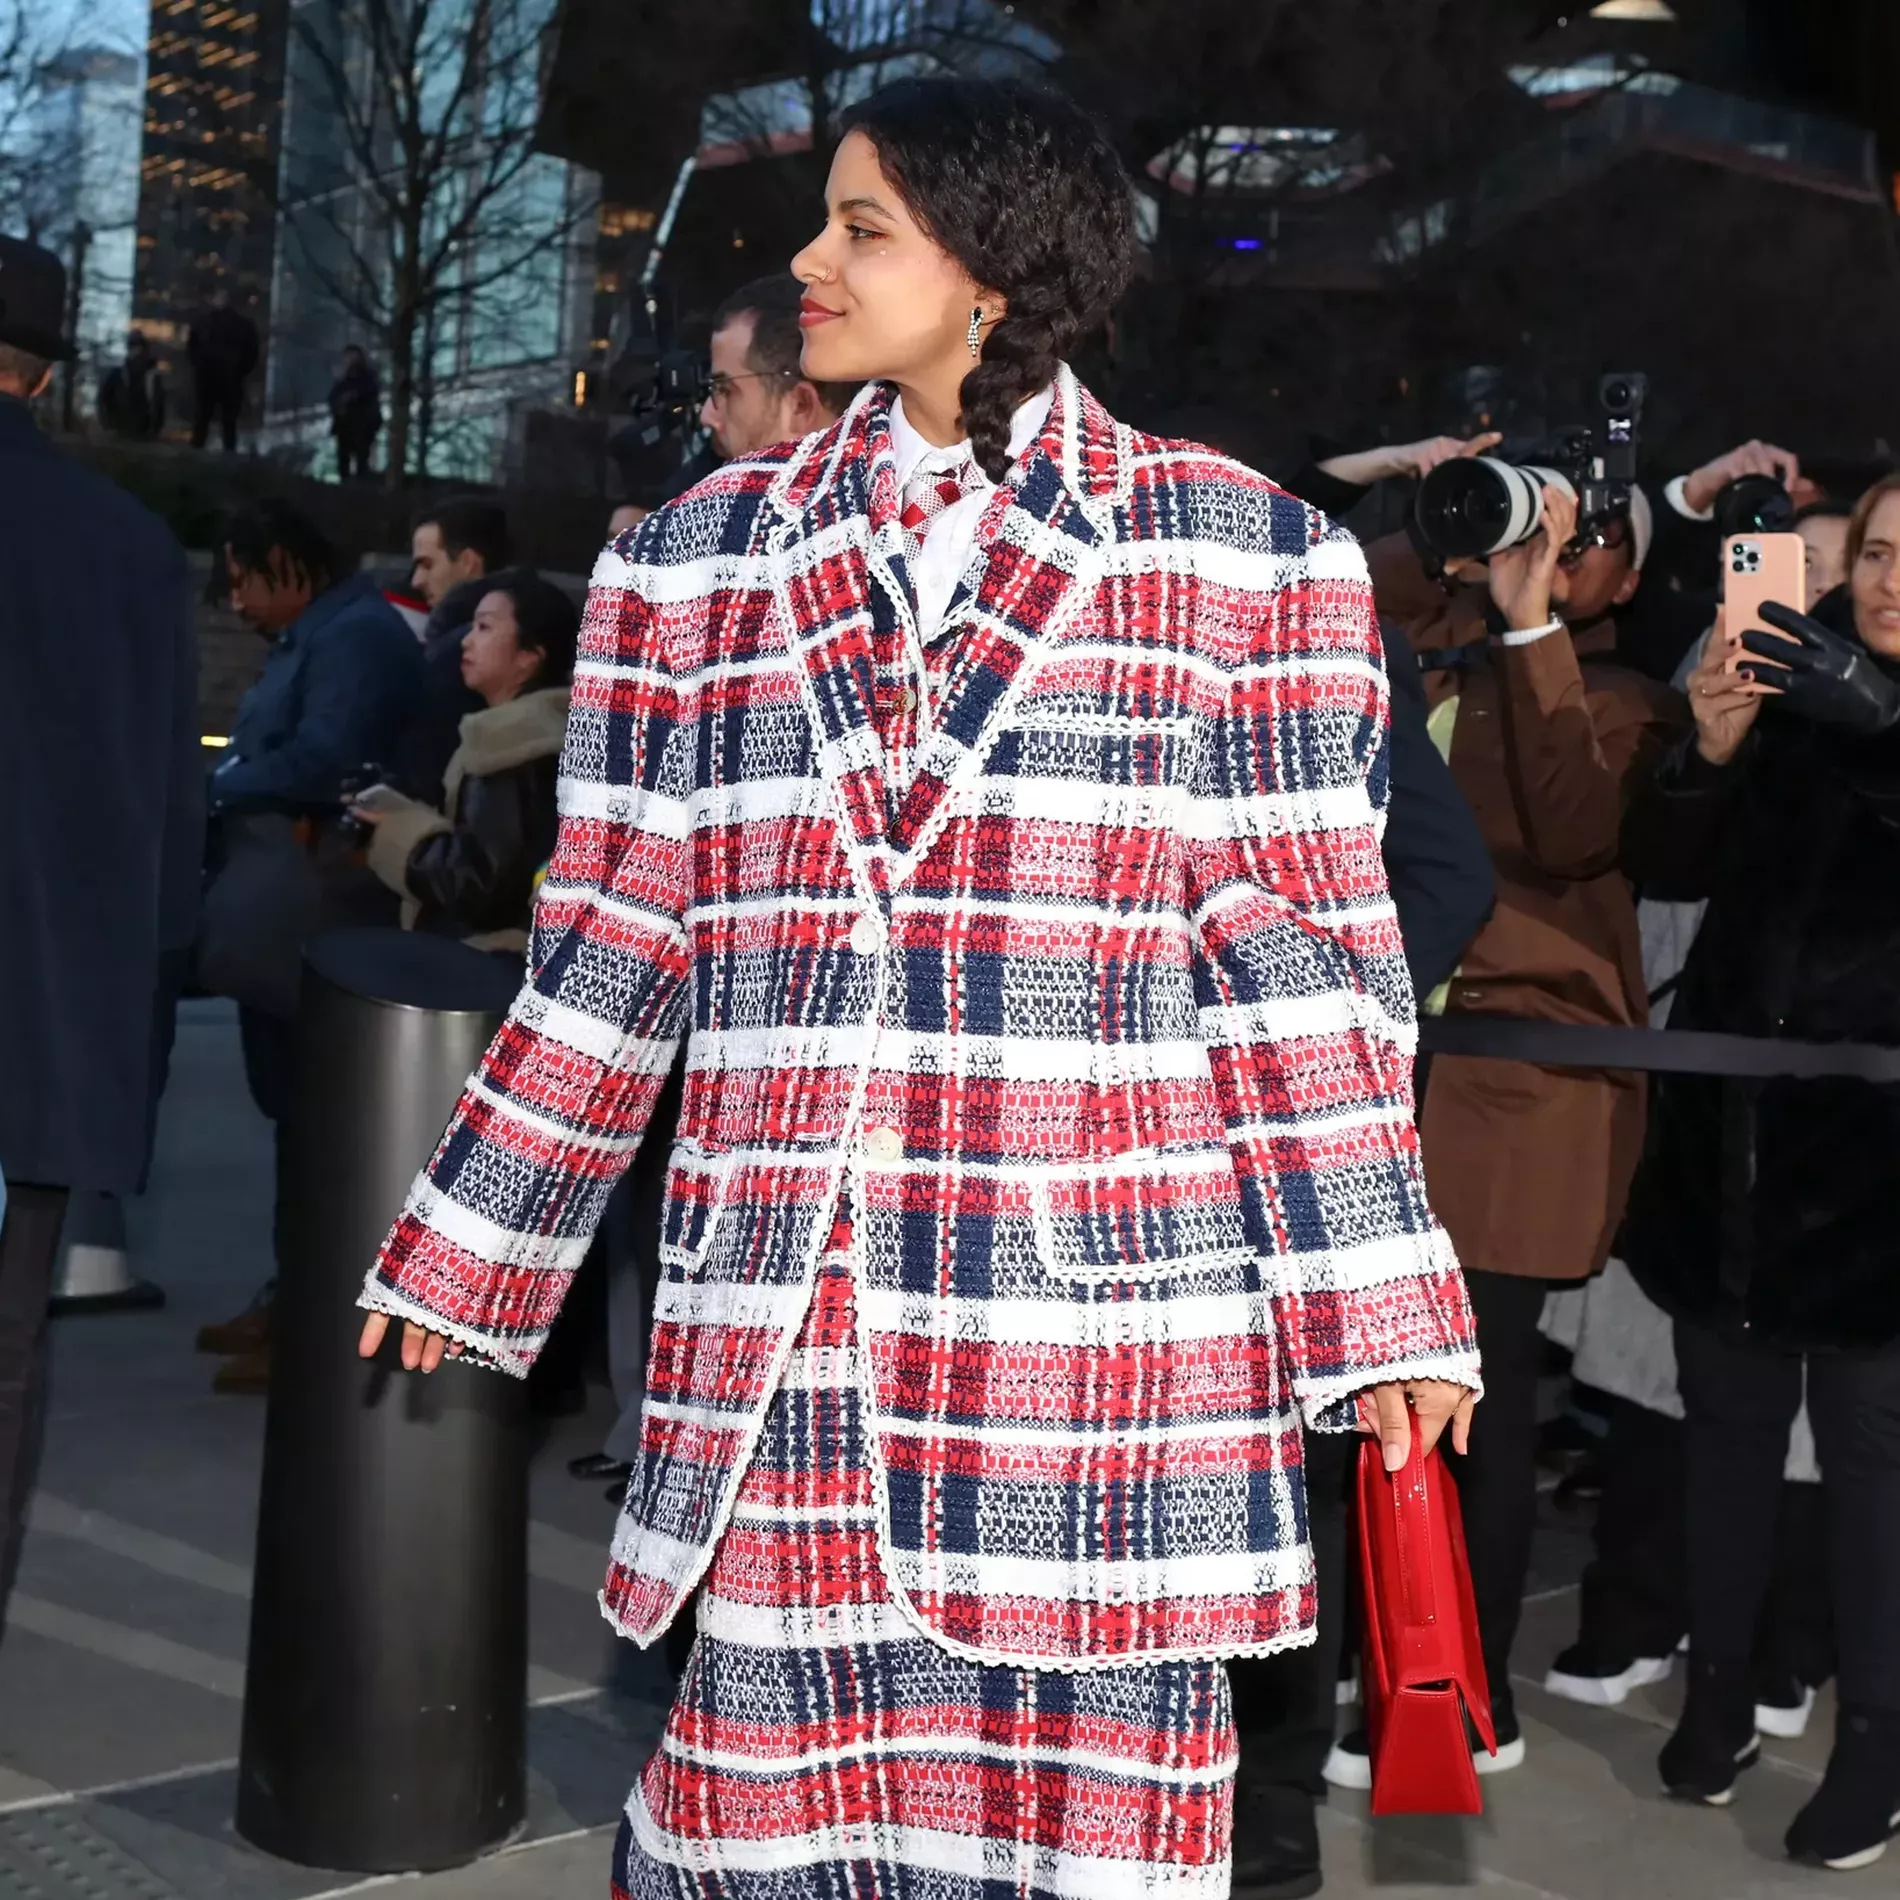 In homage to Vivienne Westwood: The style set's best tartans and